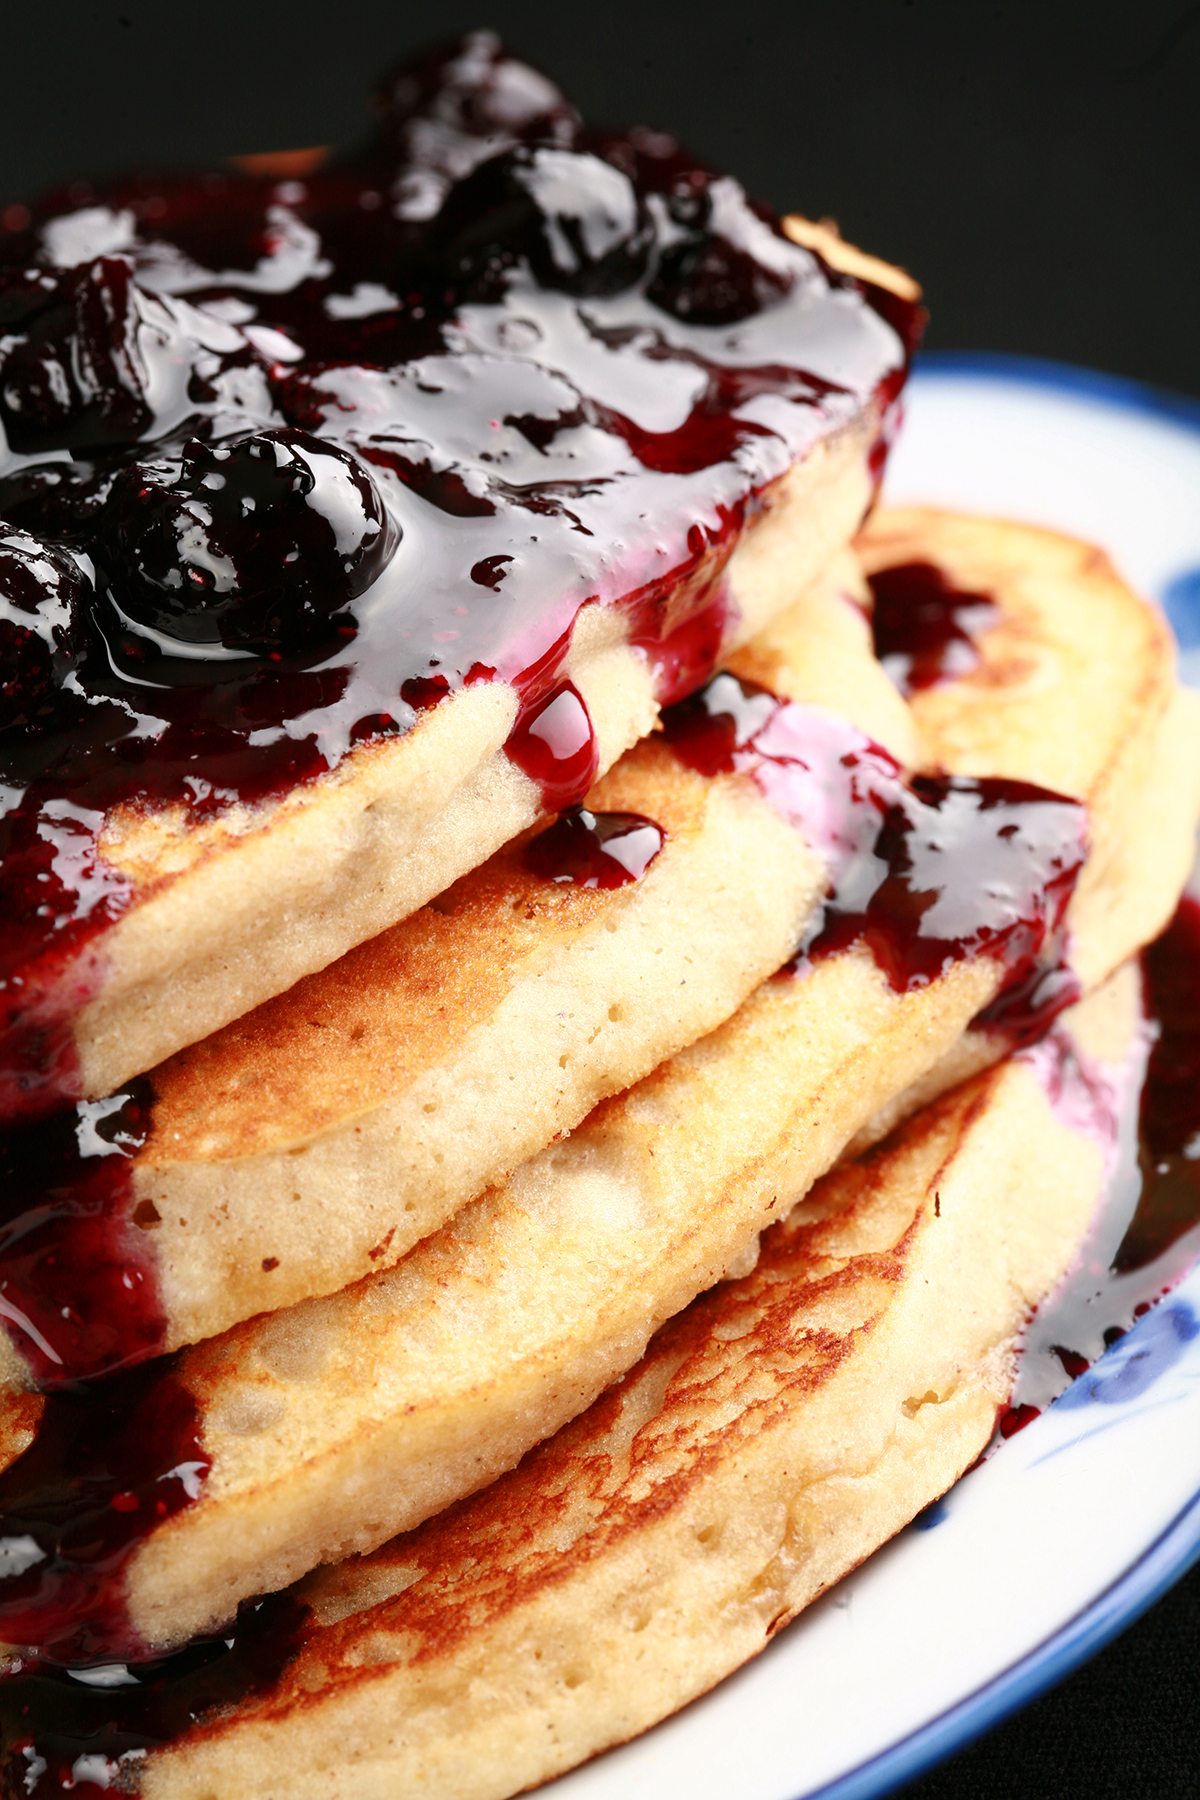 A stack of gluten-free banana buckwheat pancakes on a plate. It is topped with fresh blueberry sauce.